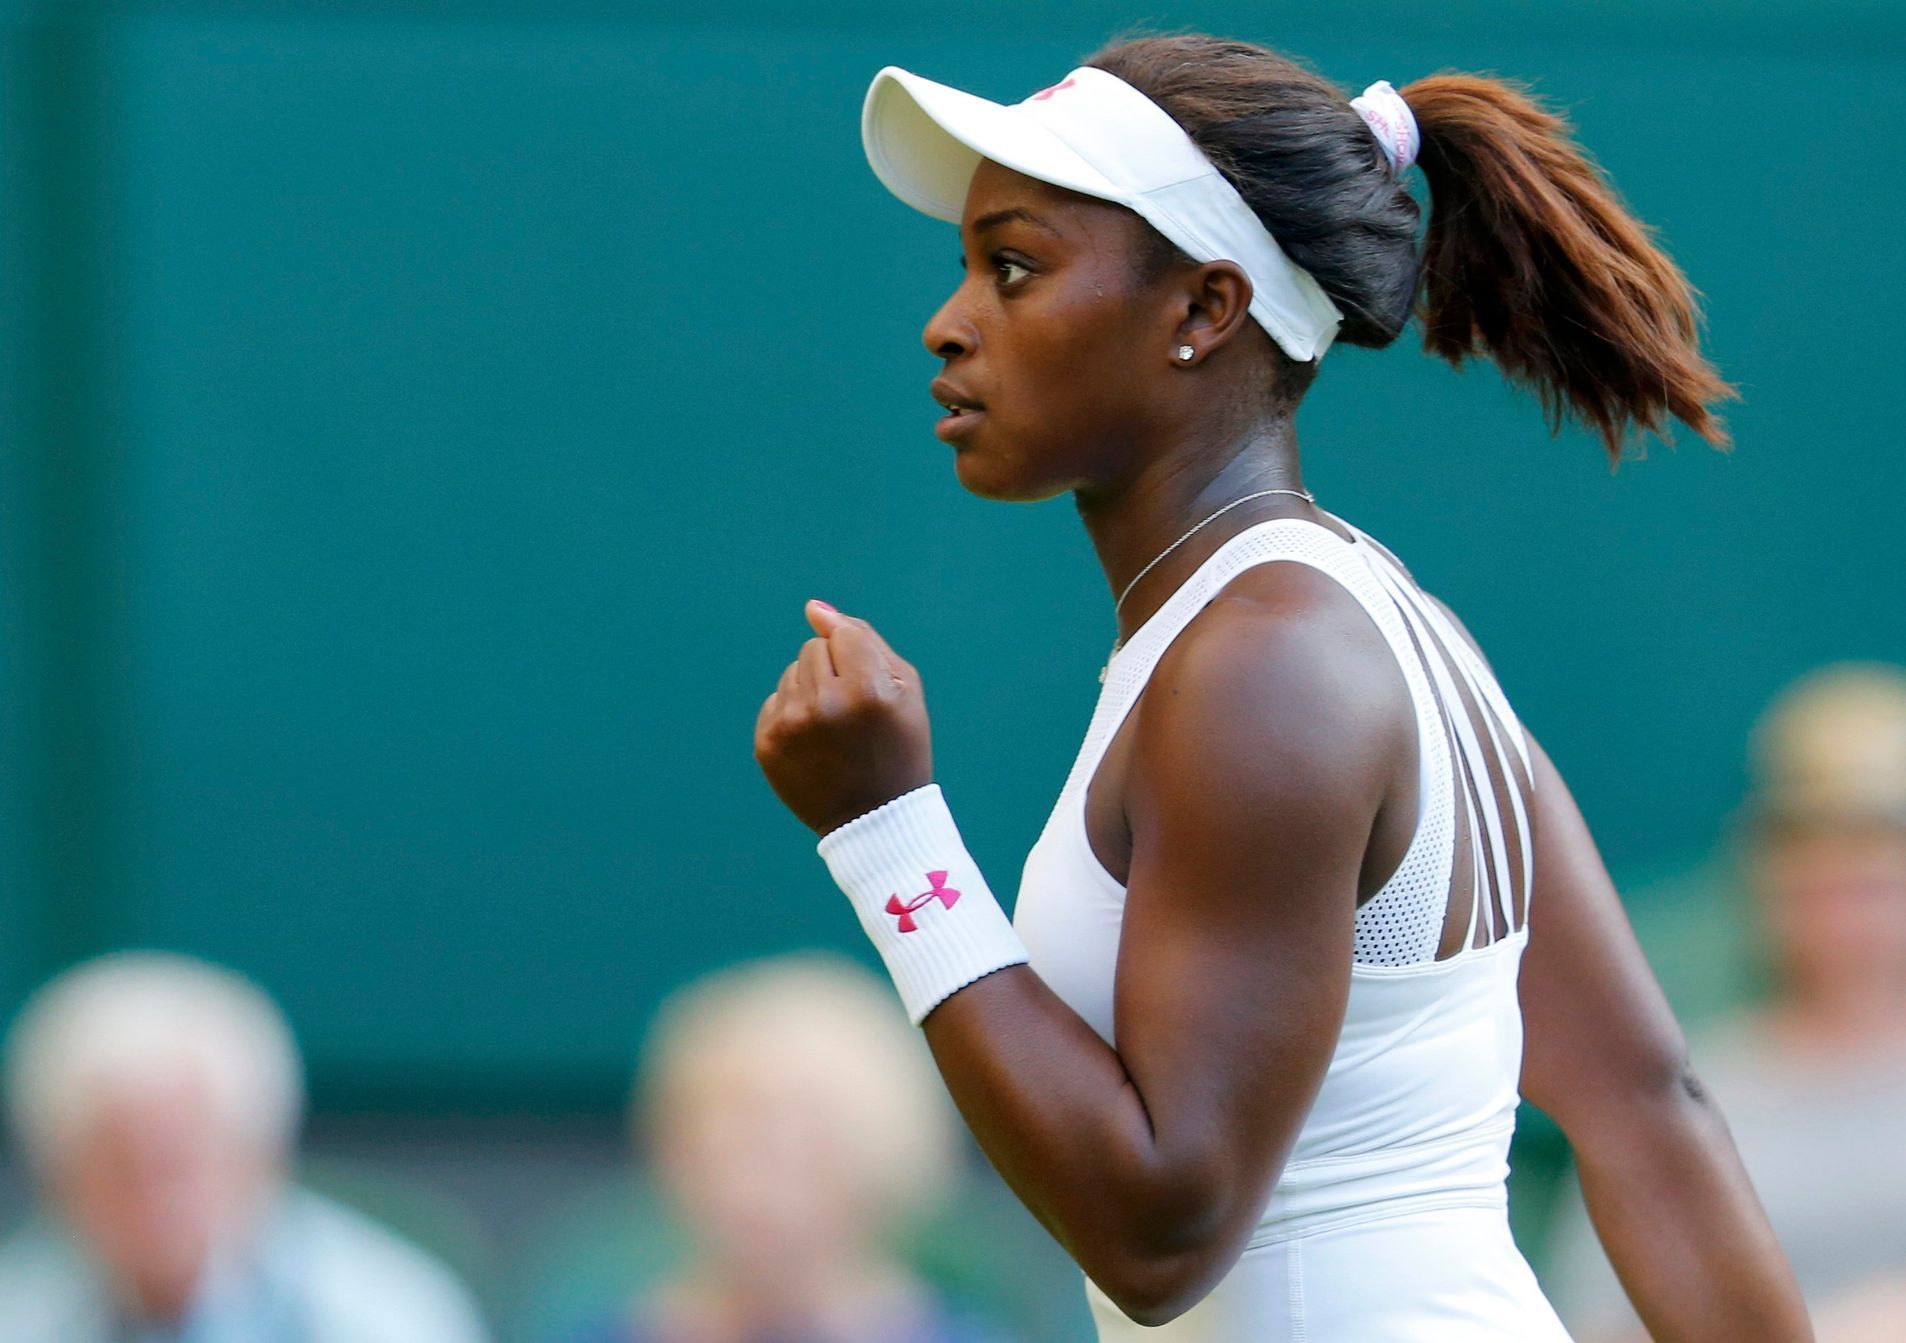 Sloane Stephens of the U.S.A. pumps her fist during her match against Barbora Strycova of the Czech Republic at the Wimbledon Tennis Championships in London